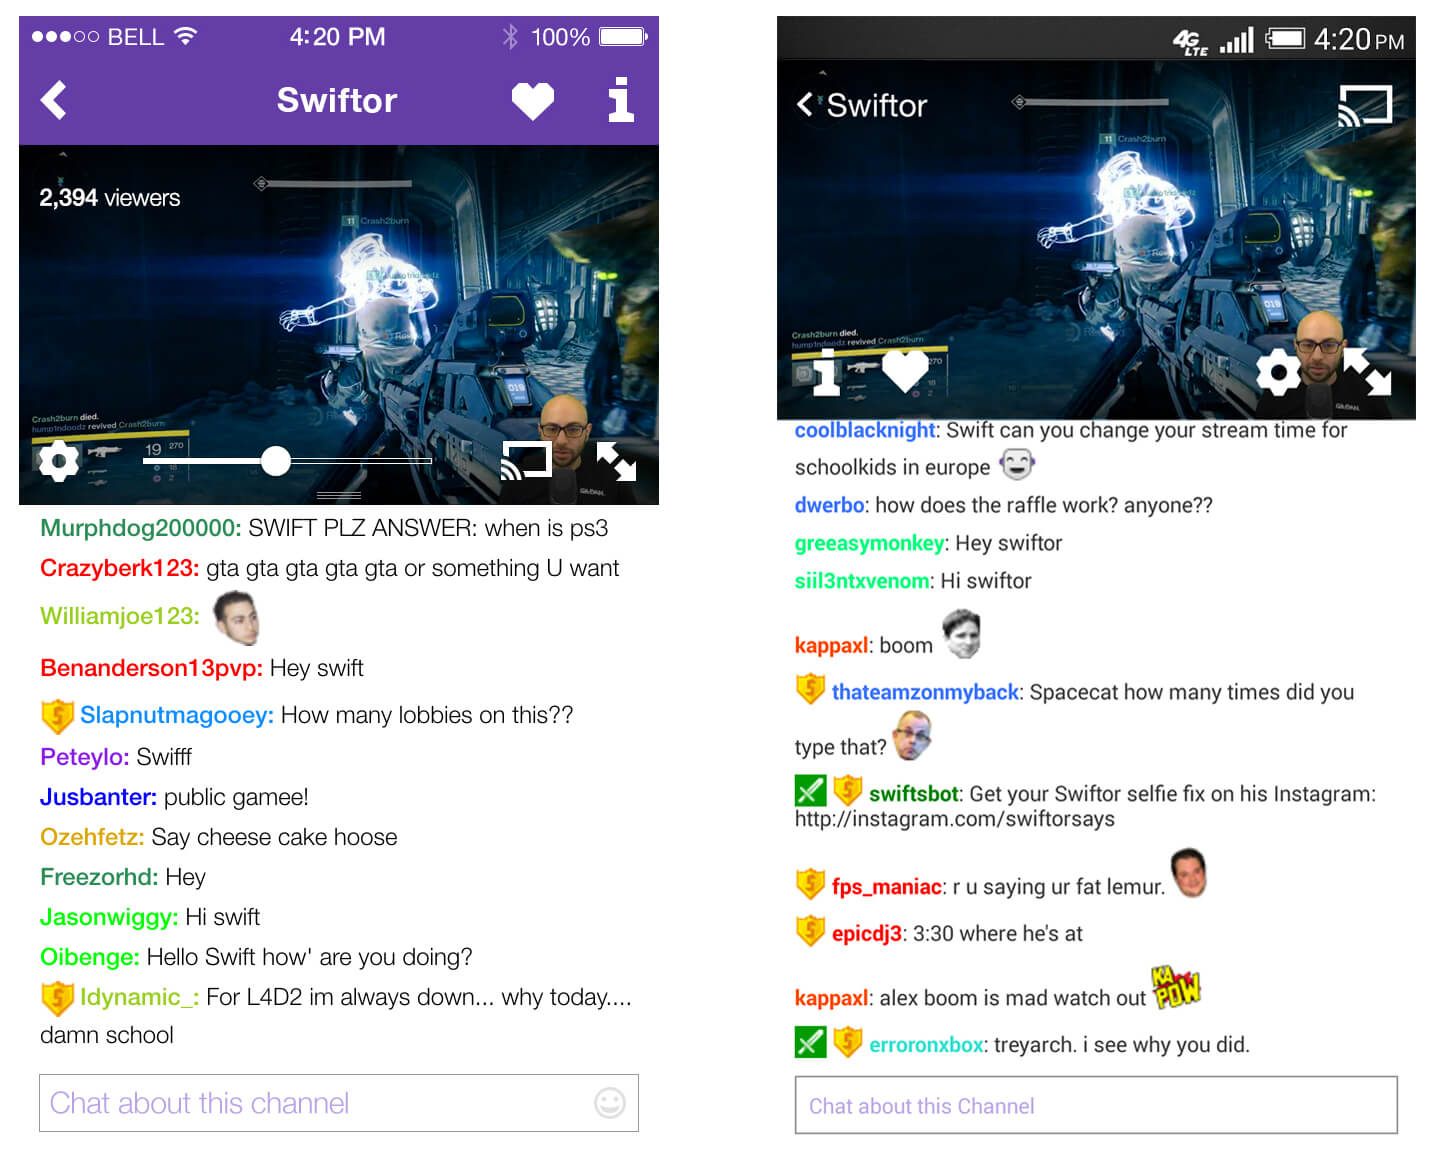 react native performance with live video and chat Twitch